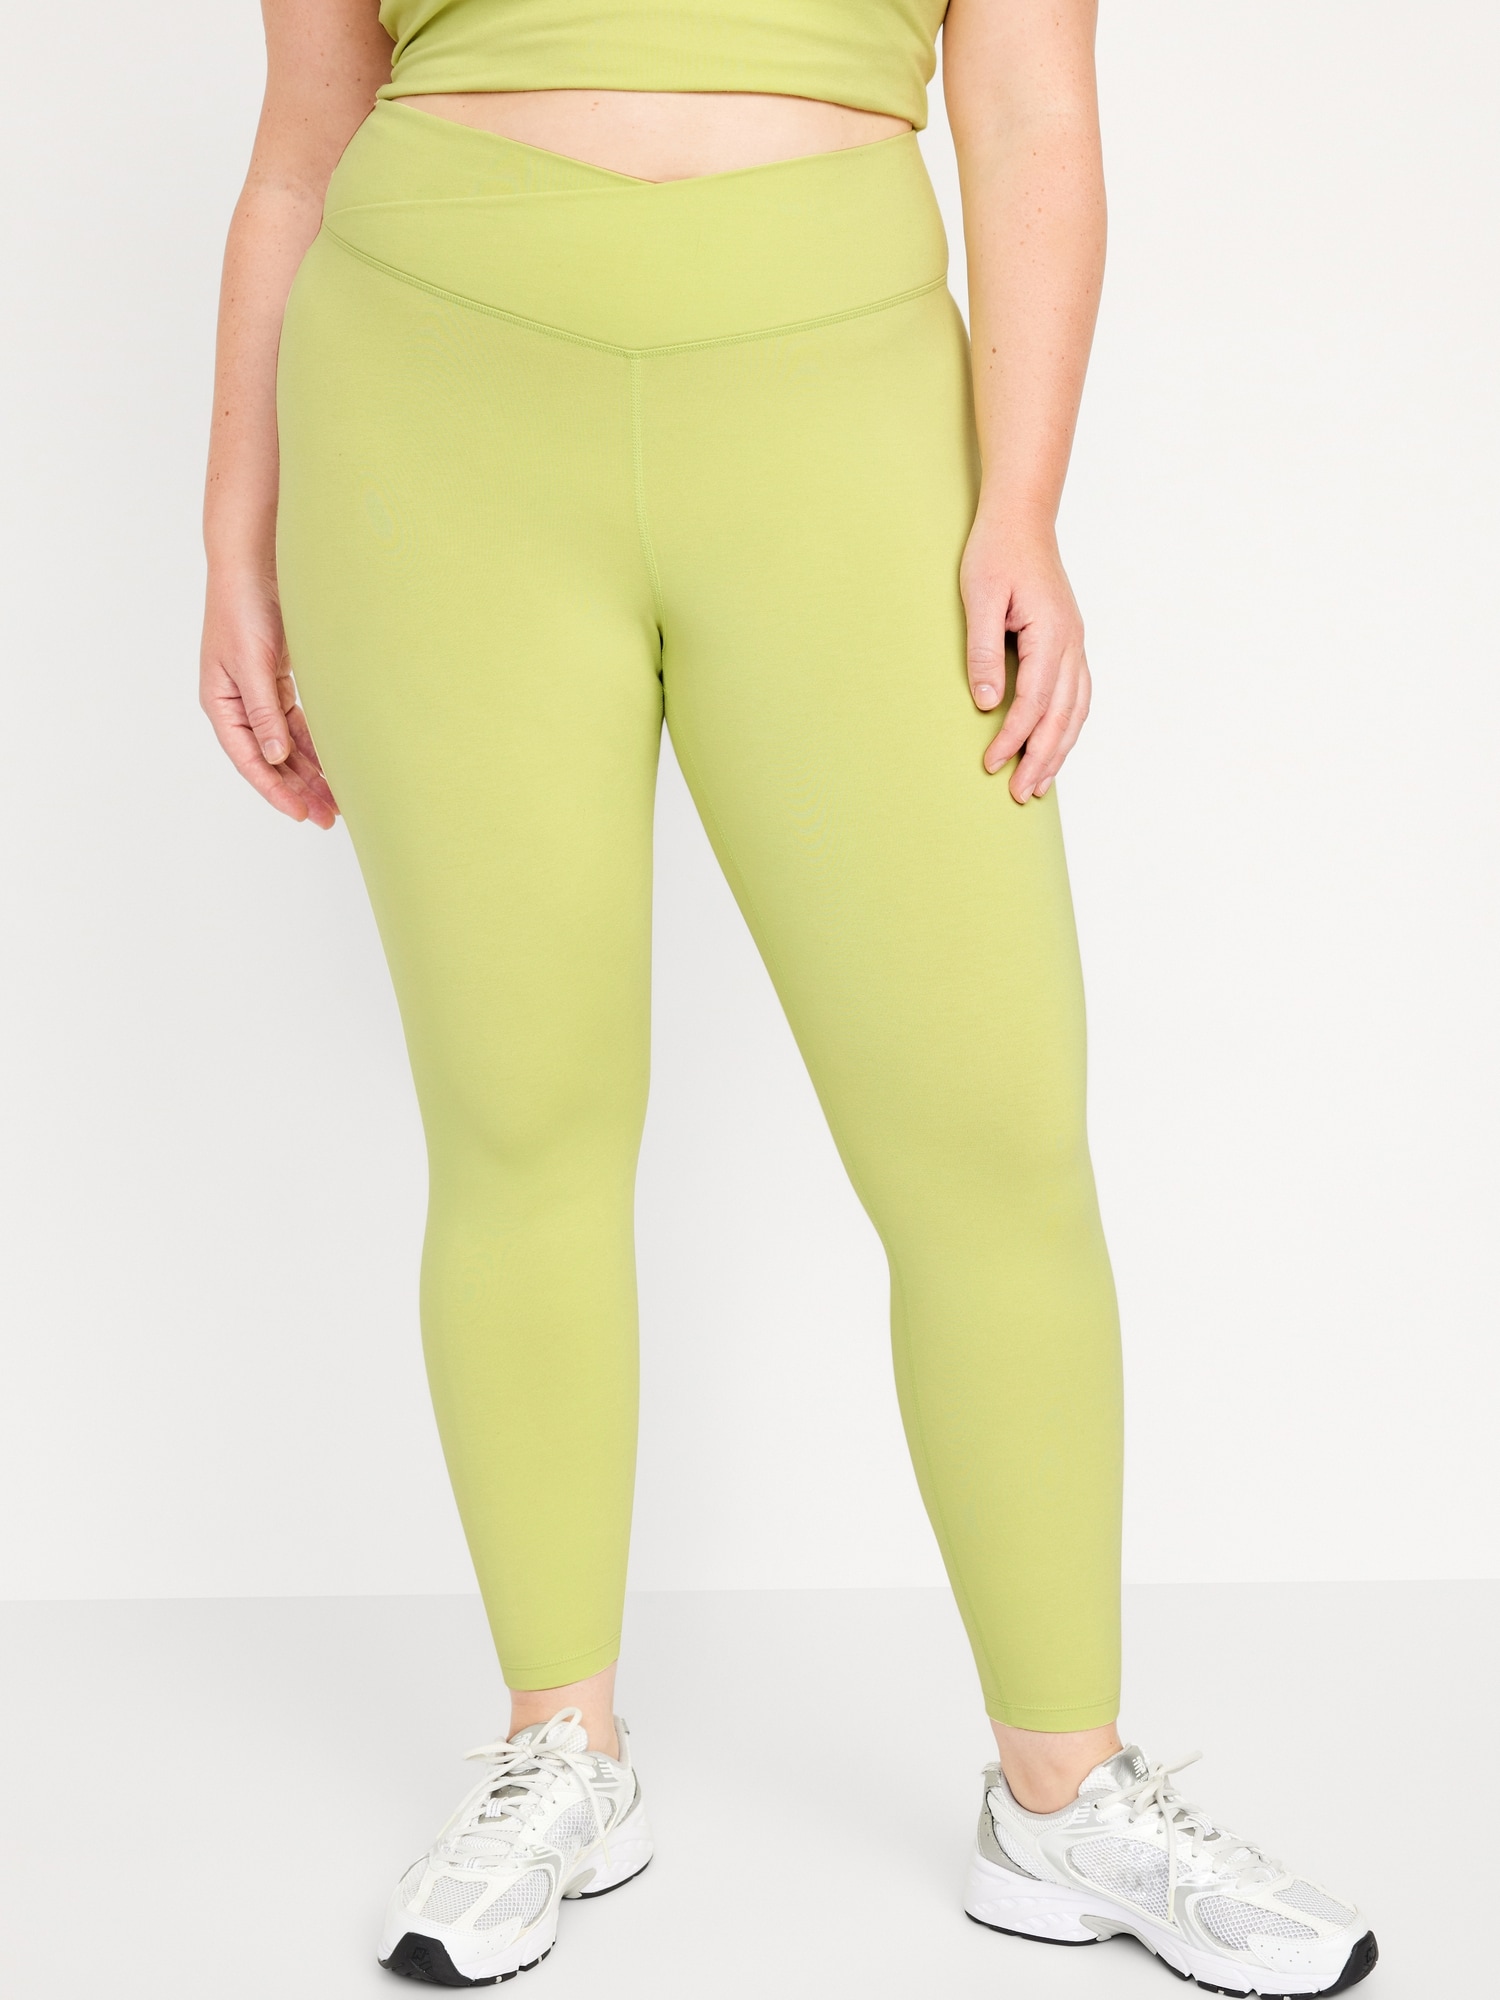 NEW OLD NAVY LEGGING TRY ON REVIEW / EXTRA HIGH WAISTED POWERCHILL  CROSSOVER 7/8 FOR WOMEN 